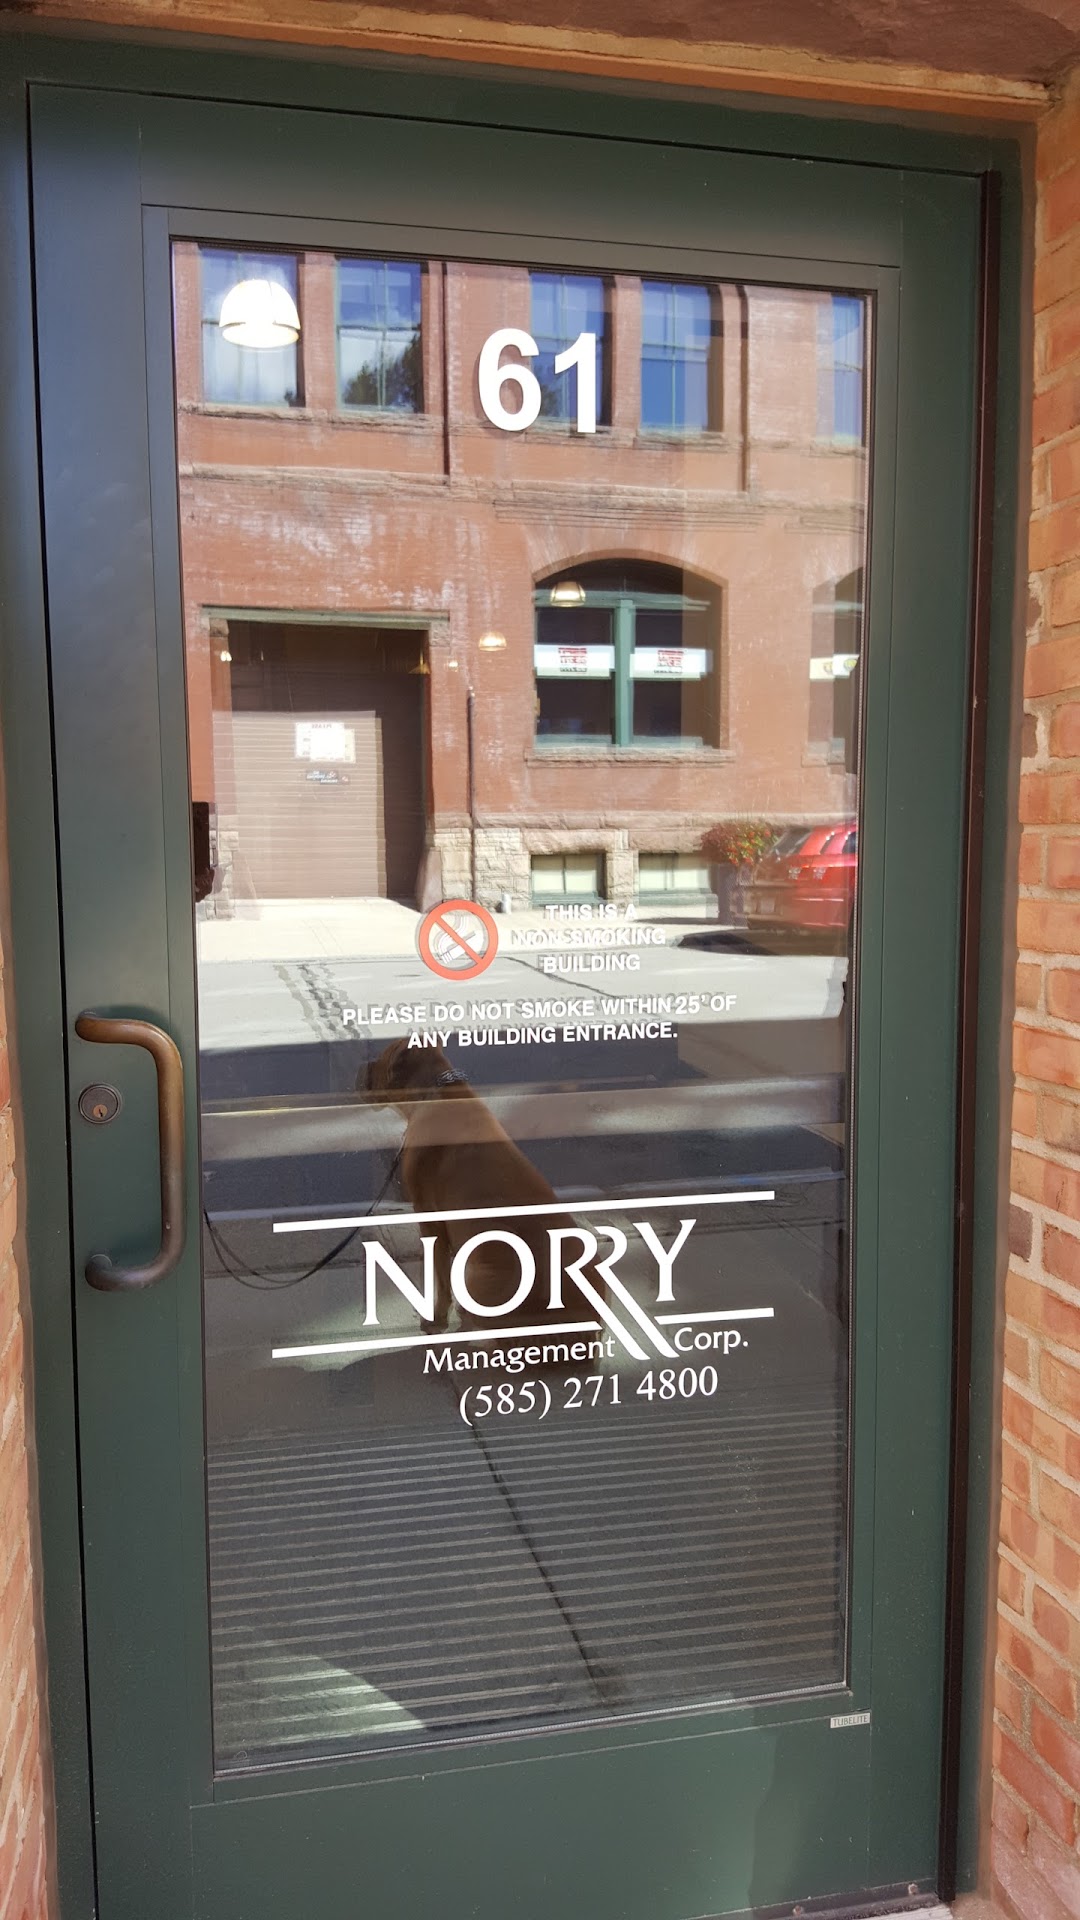 Norry Management Corporation